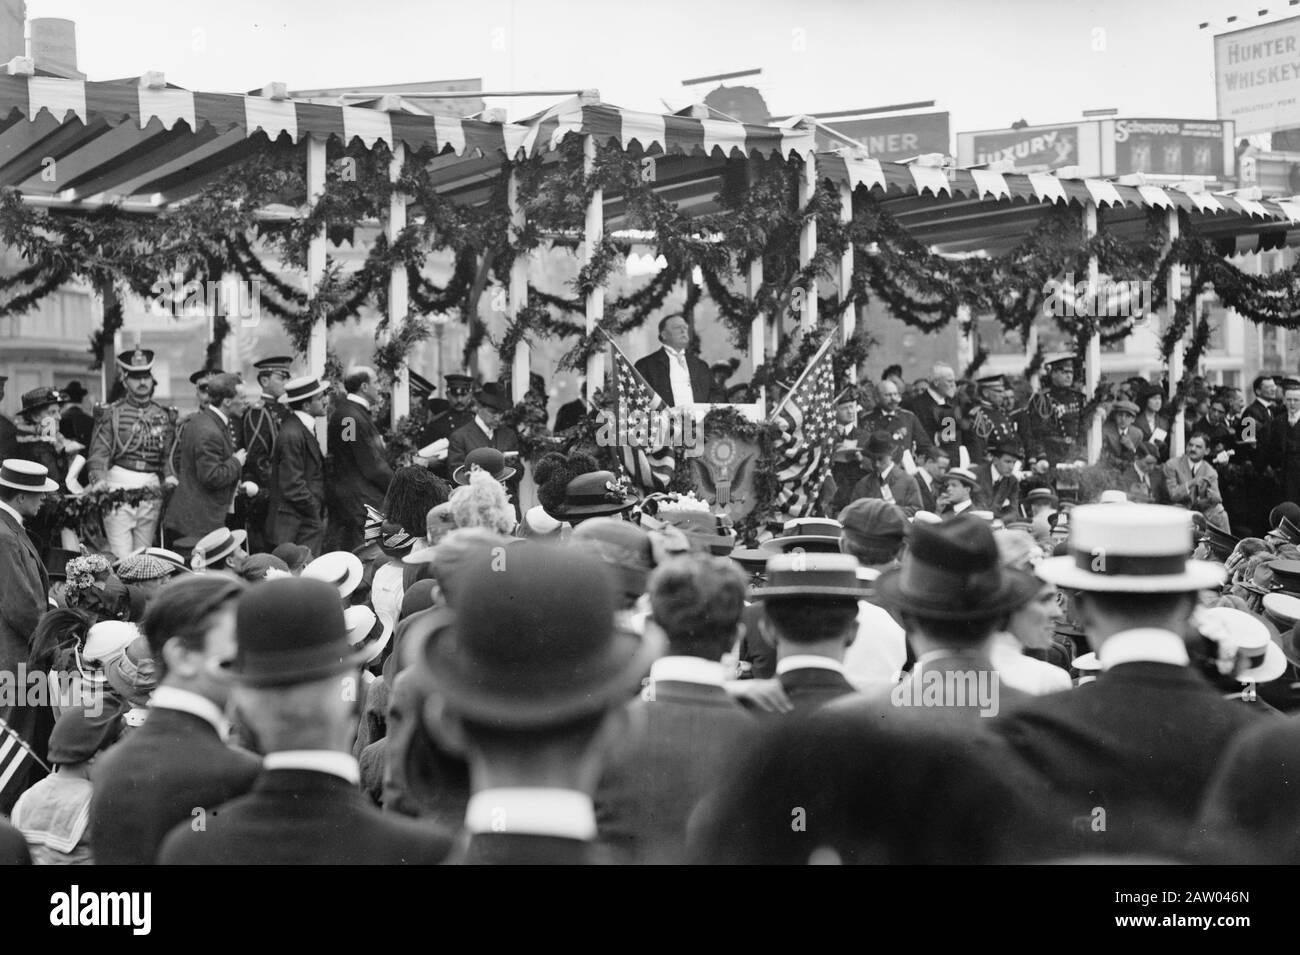 President William H. Taft at the dedication of the memorial to the battleship Maine, which exploded in the harbor of Havana, Cuba, during the Spanish-American War of 1898. In 1913, the monument was placed at the Columbus Circle and 59th Street entrance to Central Park in New York City Stock Photo